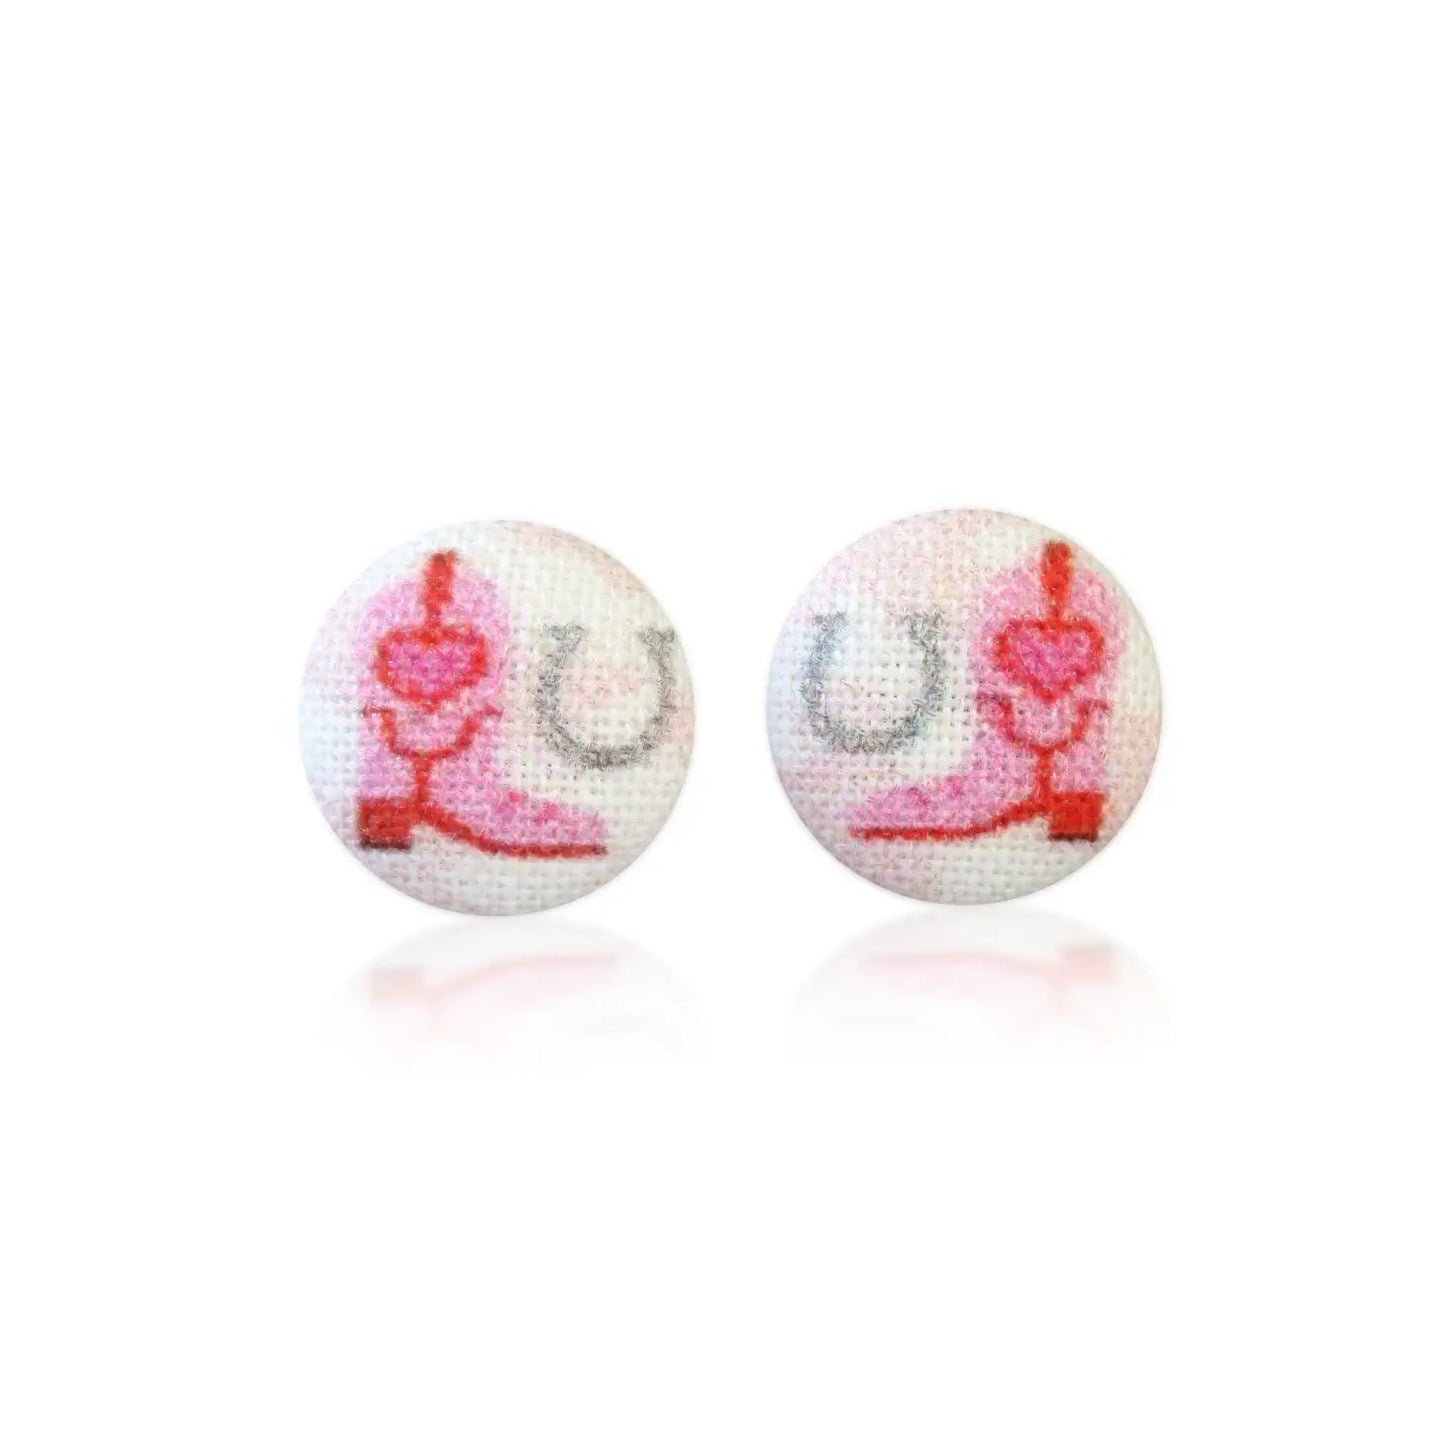 Cowgirl Boots Fabric Button Earrings | Handmade in the US